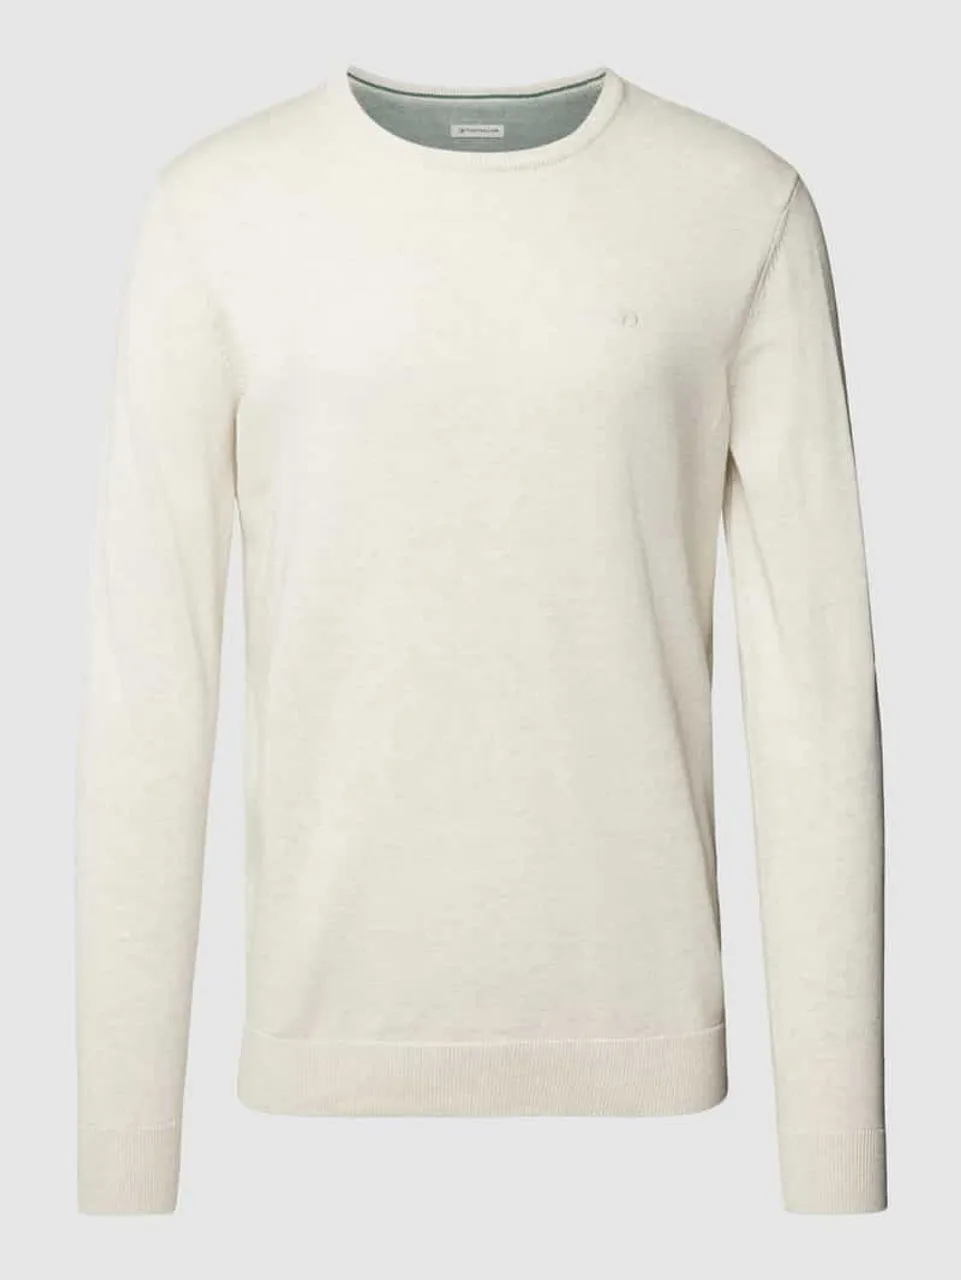 Tom Tailor Strickpullover mit Label-Stitching Modell 'BASIC' in Offwhite